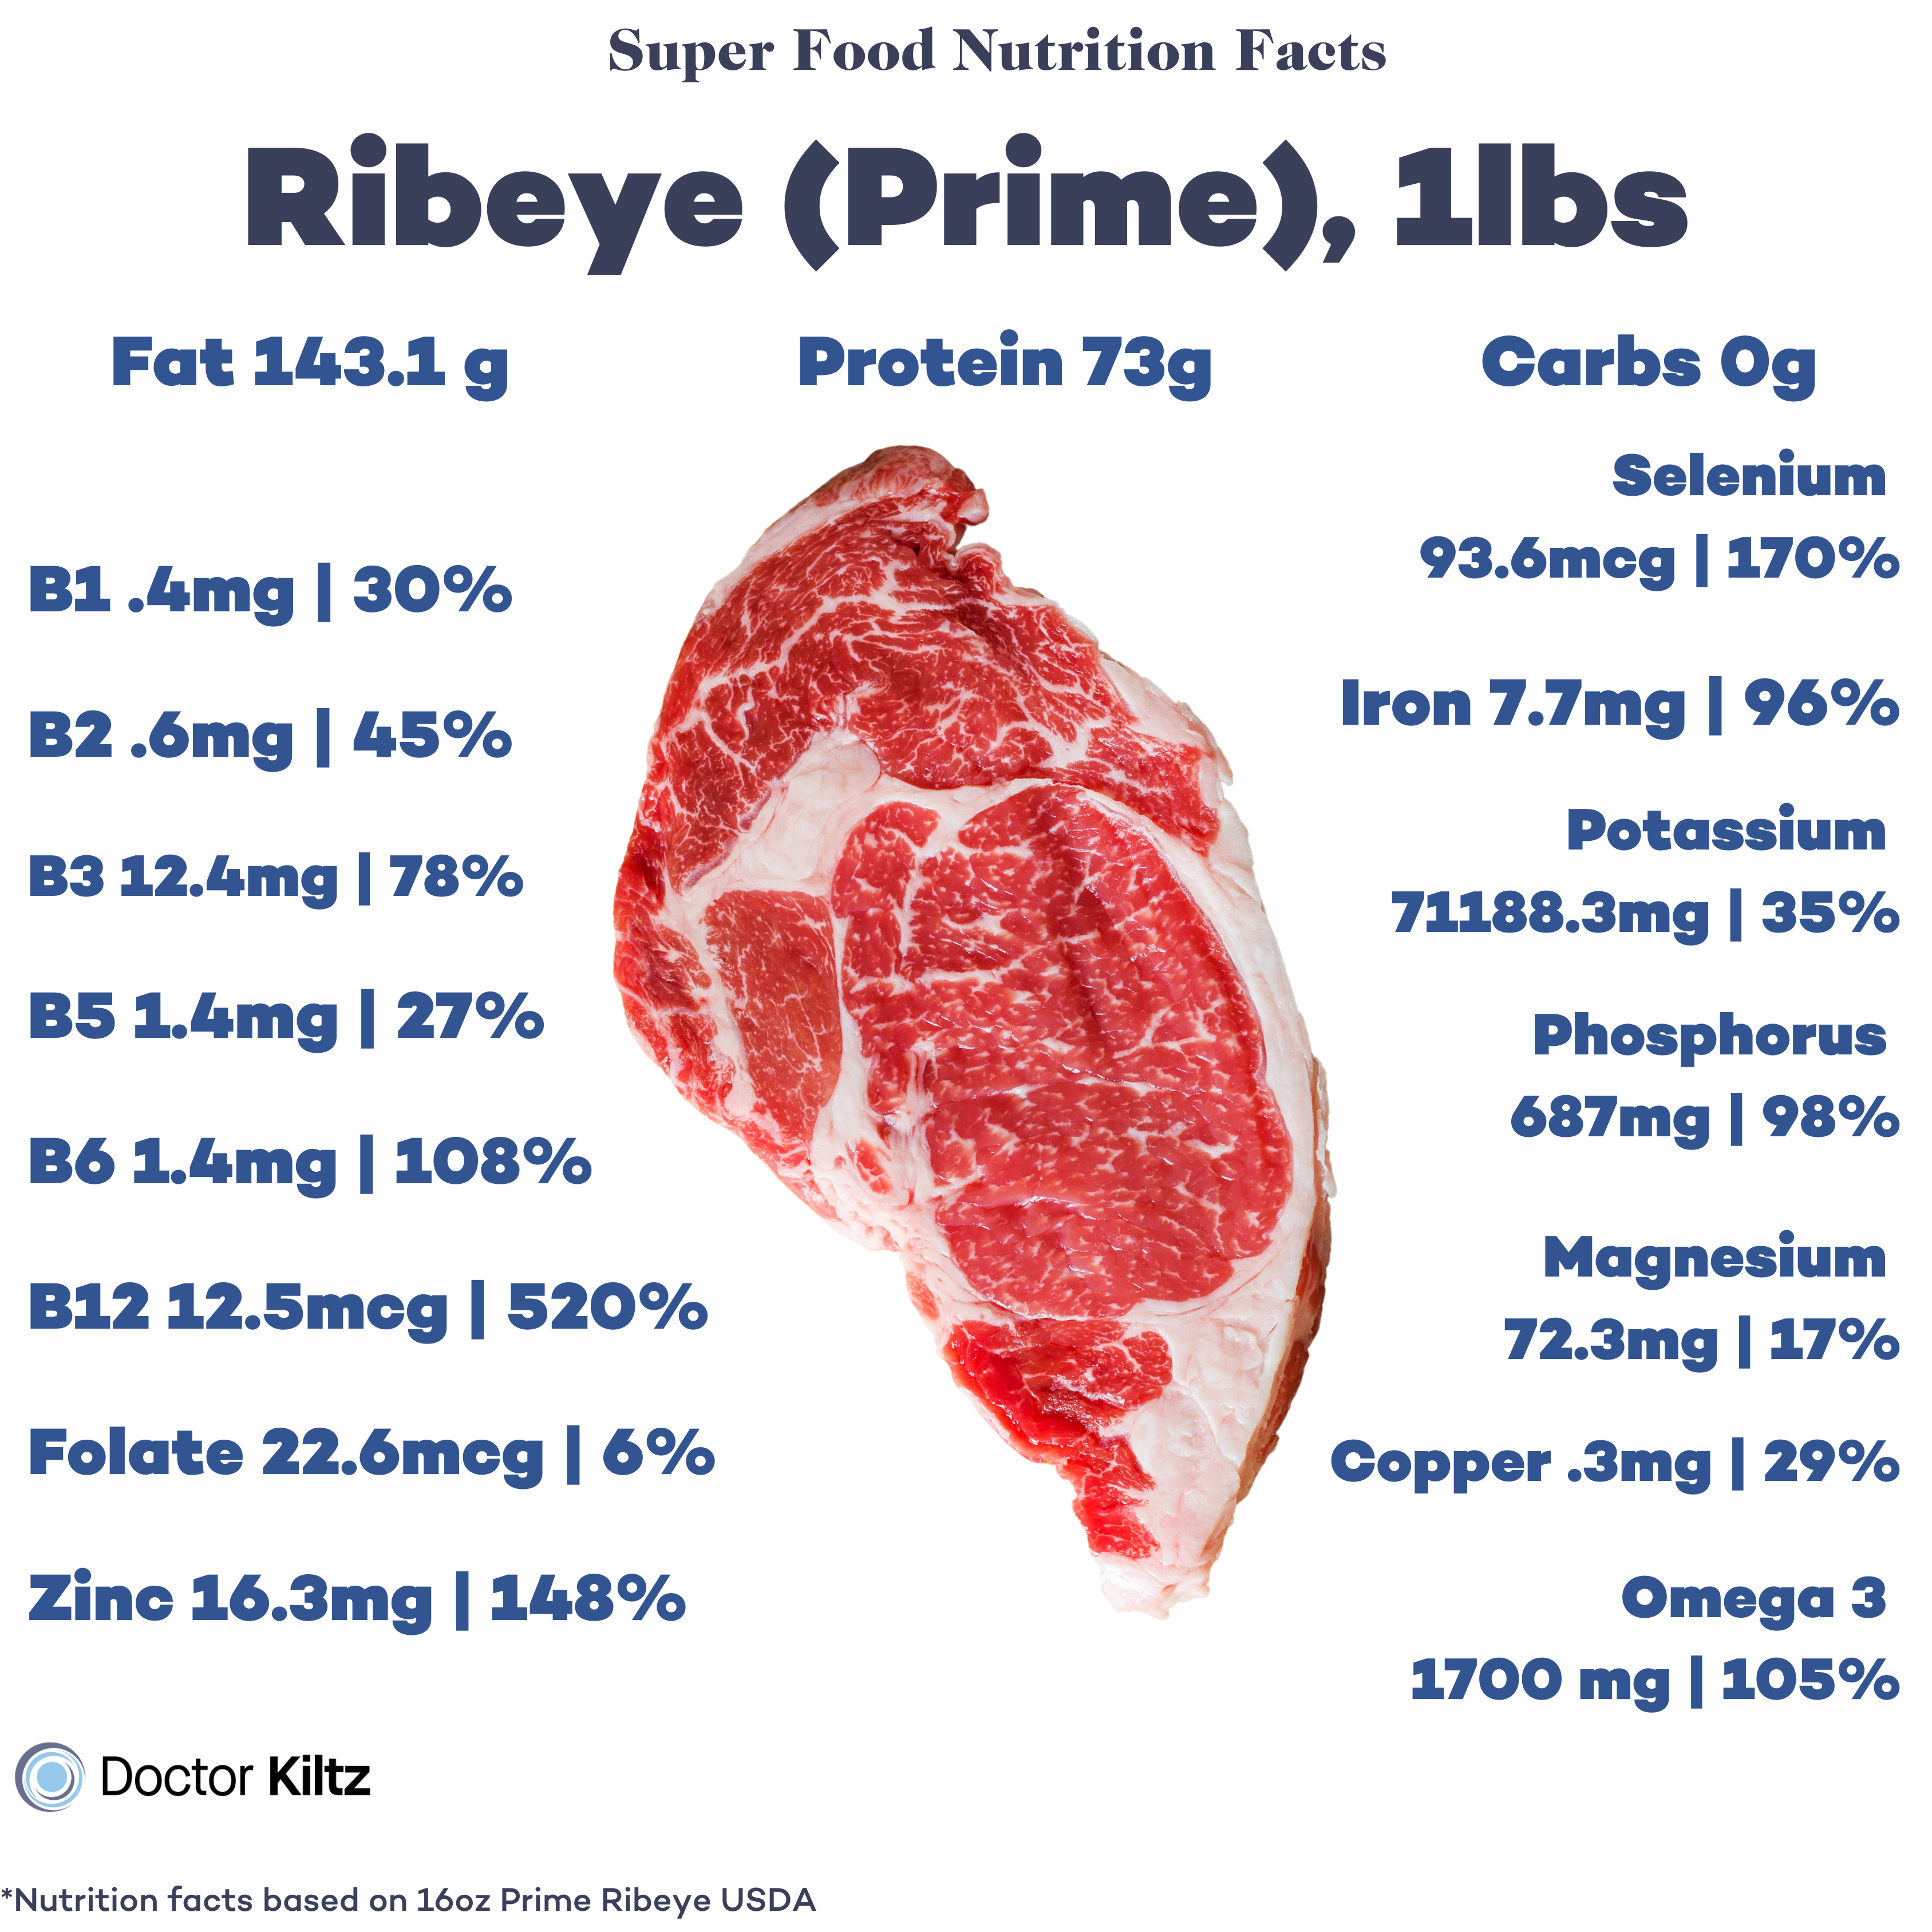 image of ribeye steak with nutrition data